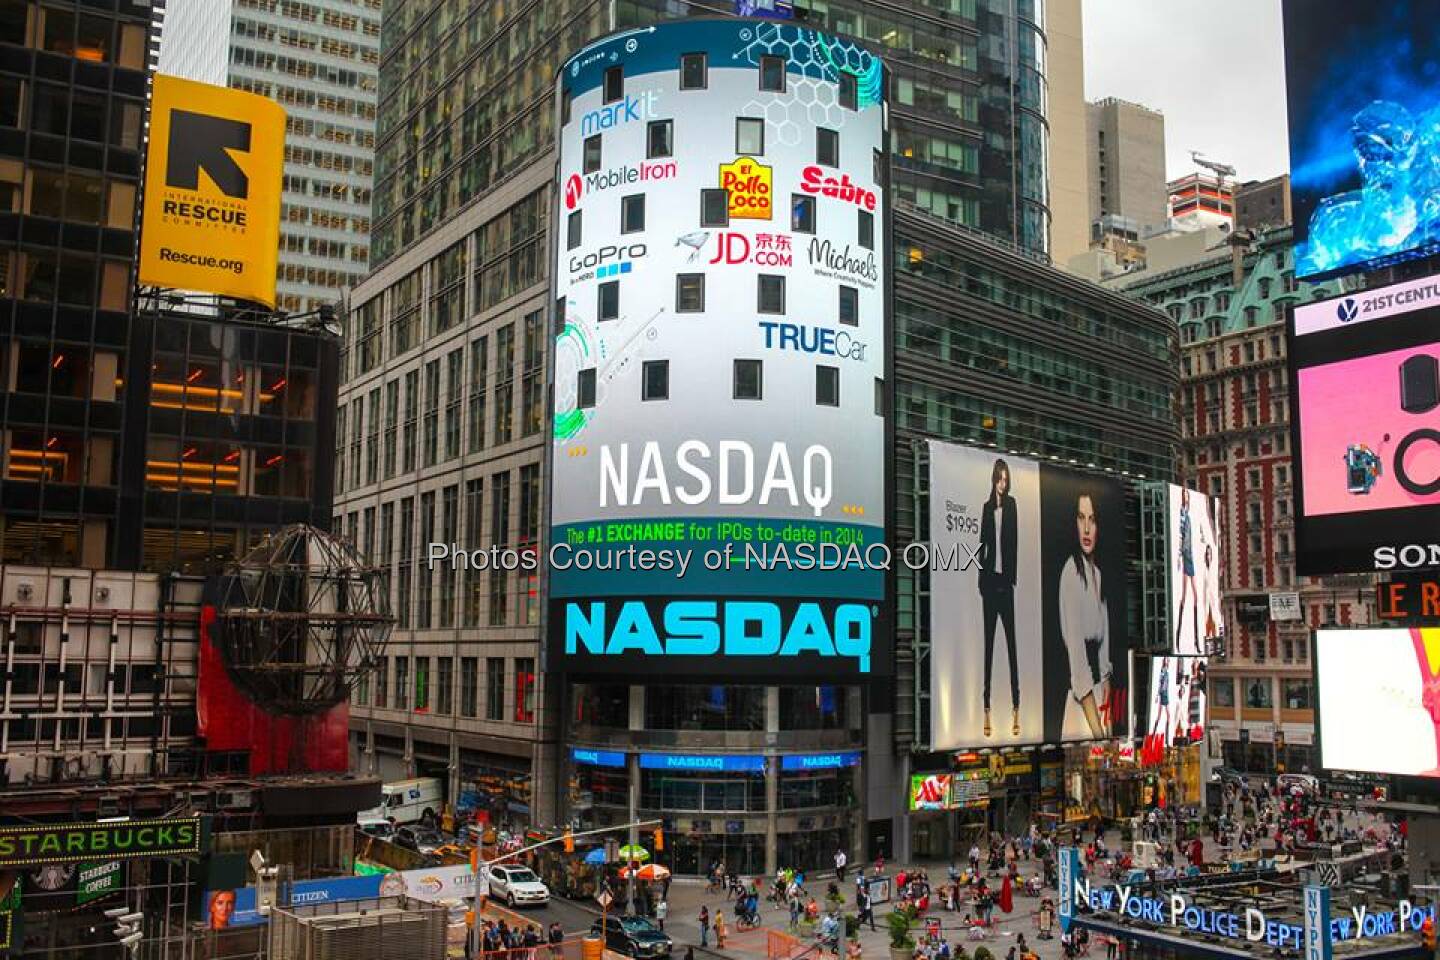 NASDAQ is the #1 exchange for IPOs to date in 2014!  Source: http://facebook.com/NASDAQ